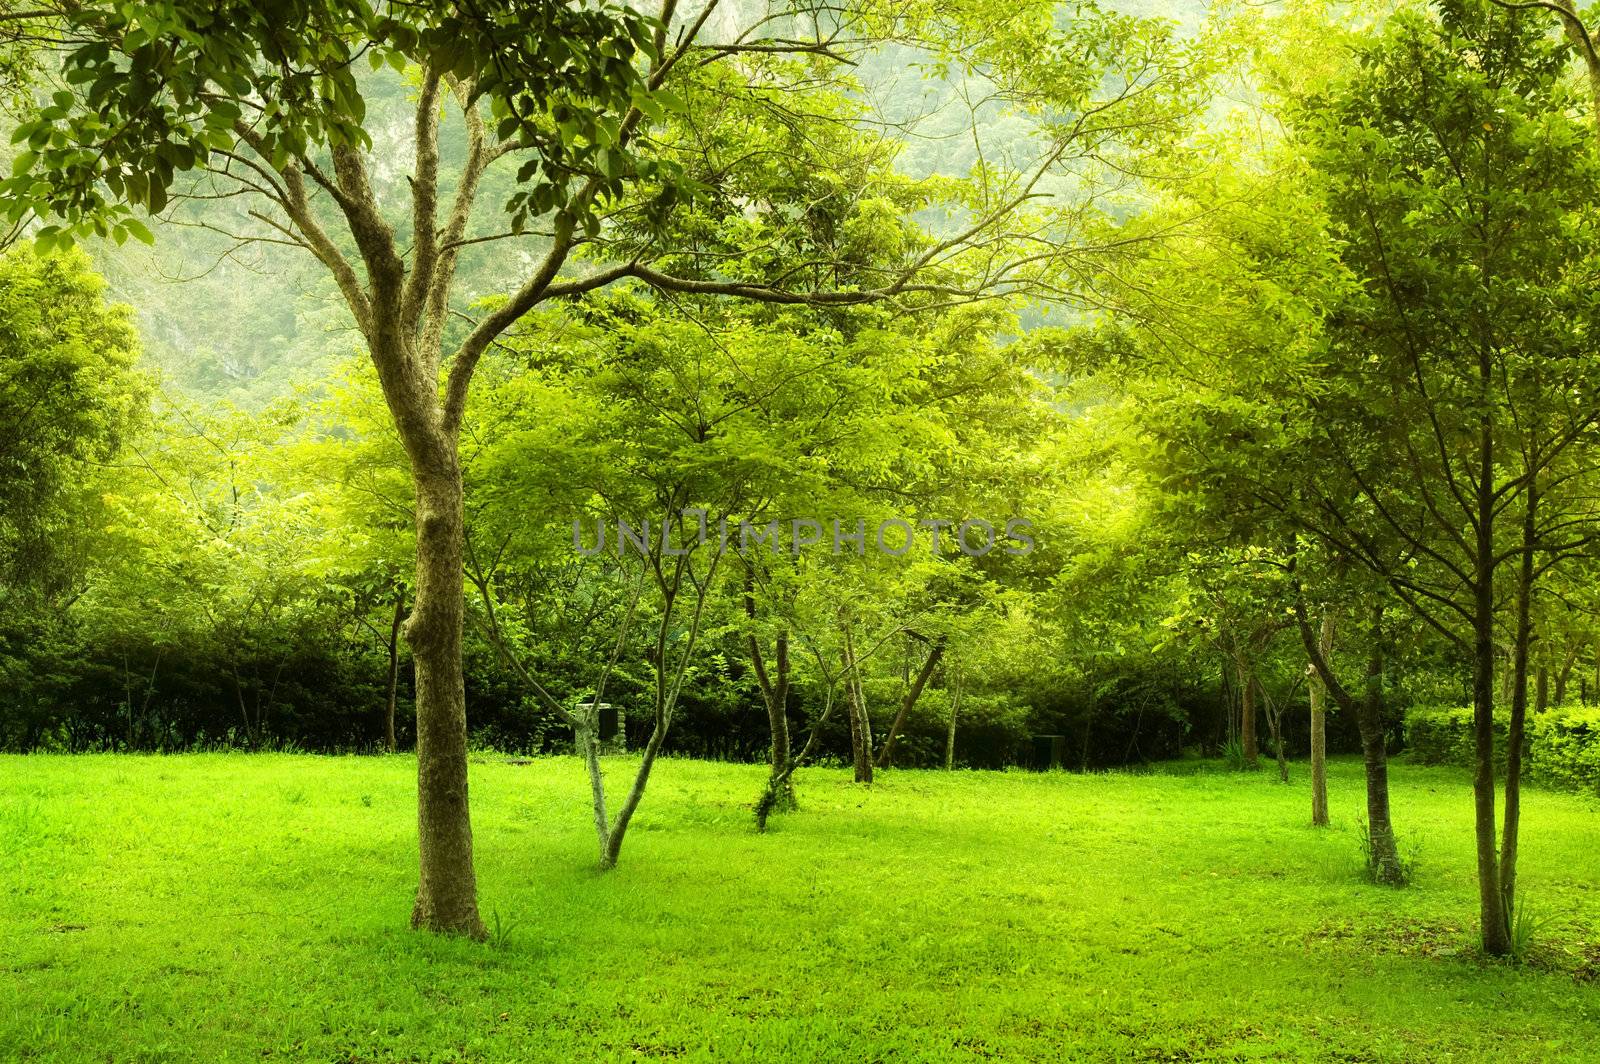 Green trees in park, a morning view.